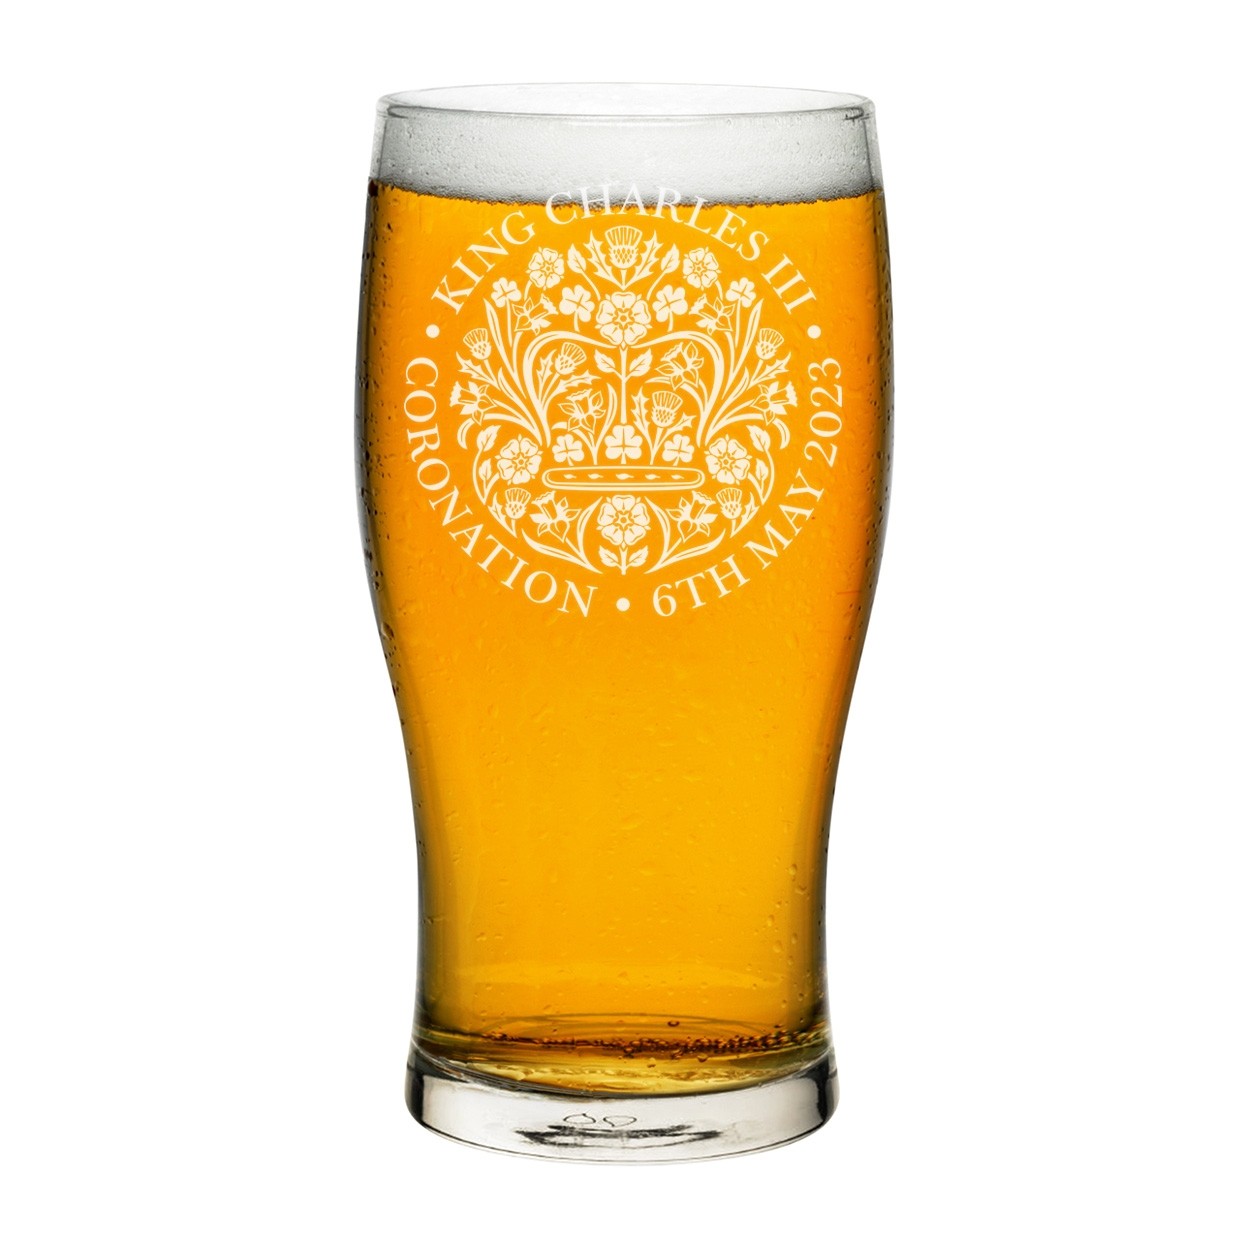 Coronation Emblem King Charles III Pint Glass Tulip Craft Beer Cider Commemorative Souvenir Gift His Majesty 6th May 2023